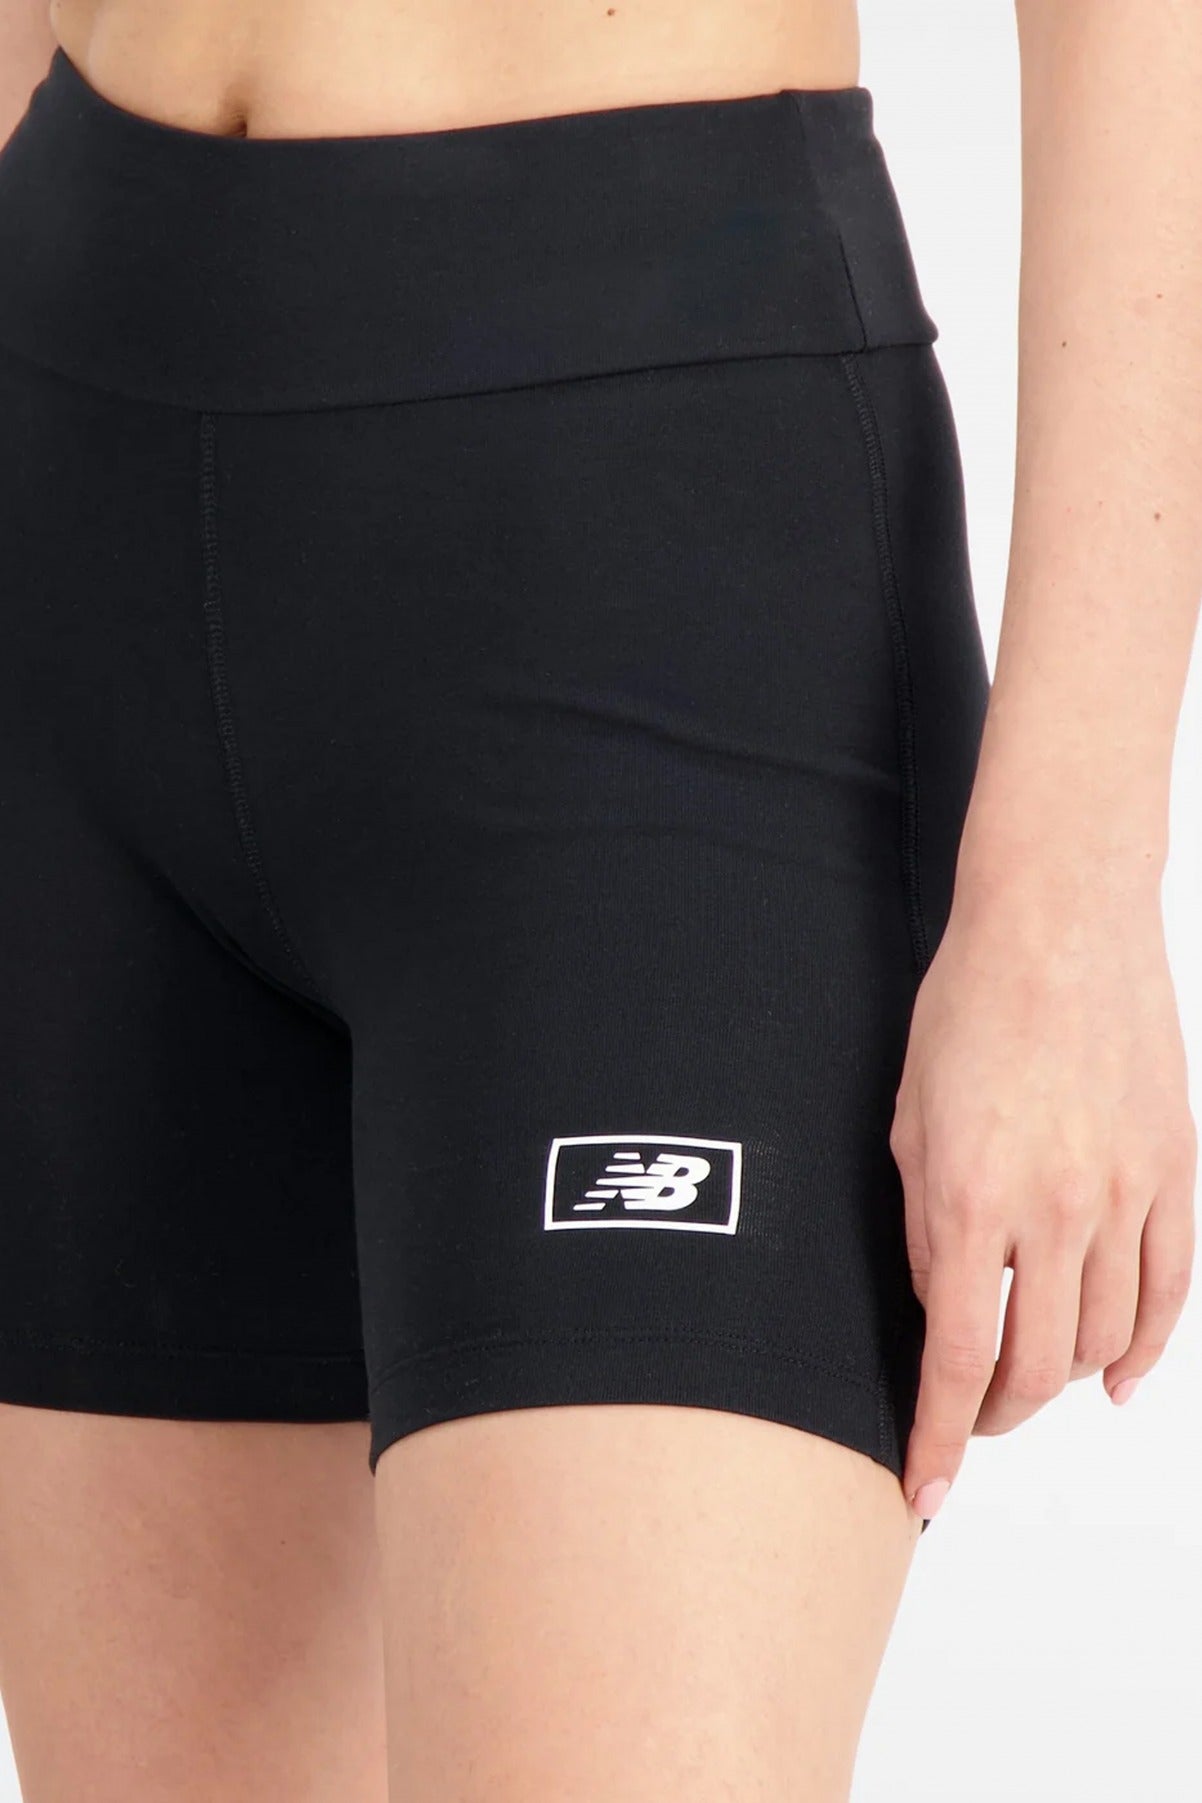 NEW BALANCE FITTED SHORT en color NEGRO  (3)